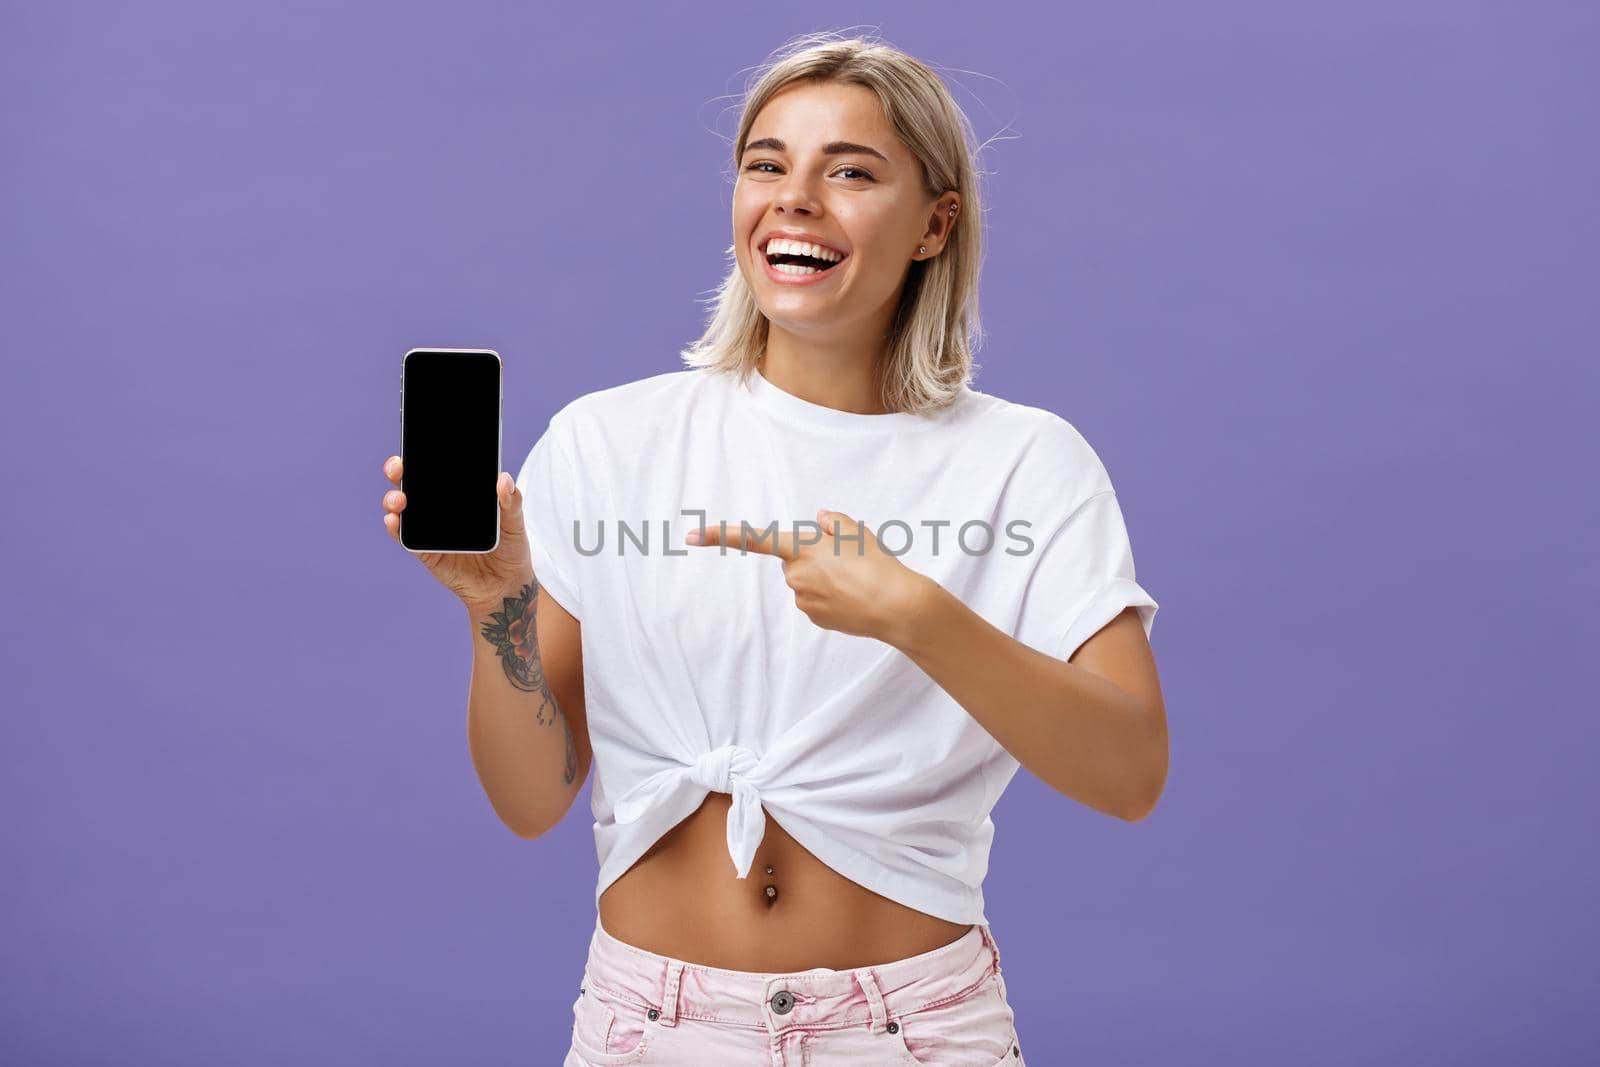 Satisfied happy beautiful tanned woman with blond hairstyle and tattoos holding smartphone showing device screen and pointing at gadget with index finger smiling at camera over purple wall. Technology and advertising concept